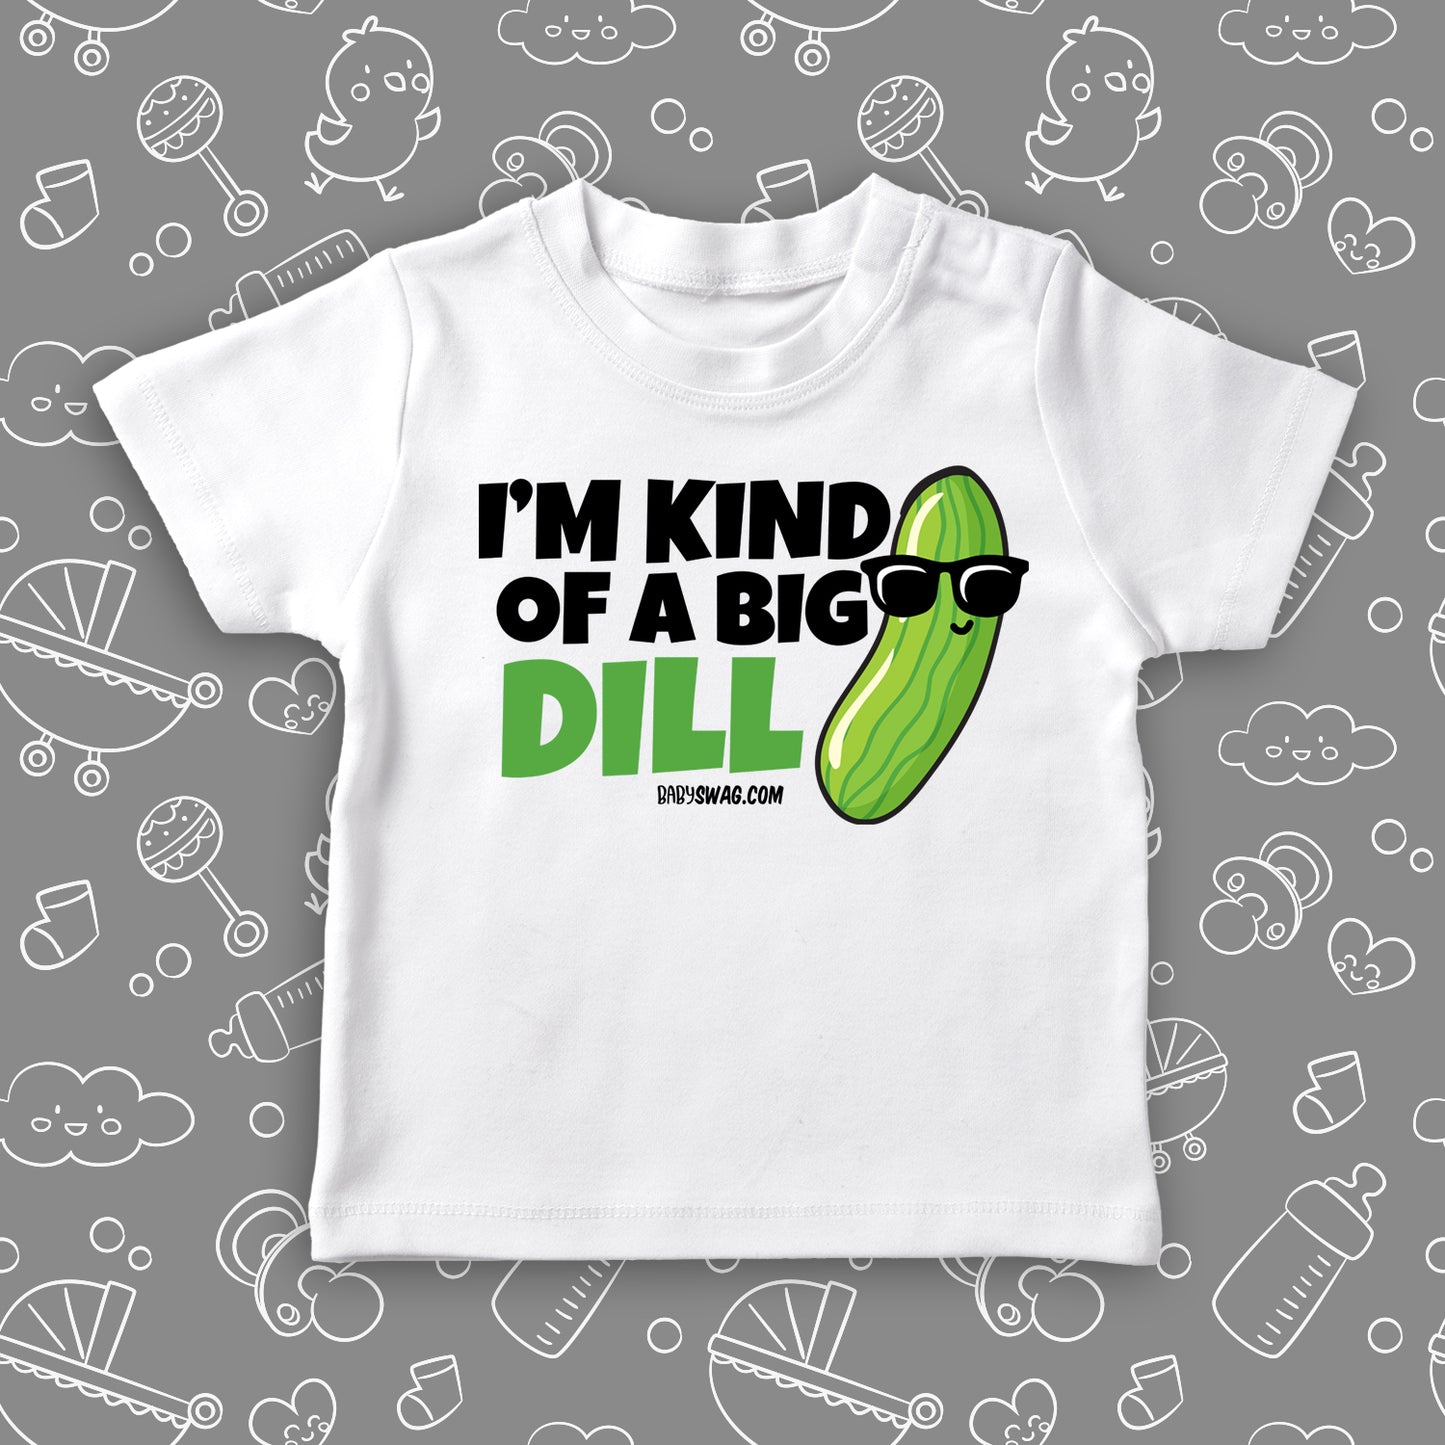 A funny toddler shirt saying "I'm Kind Of A Big Dill", with the image of a pickle wearing sunglasses, in white. 